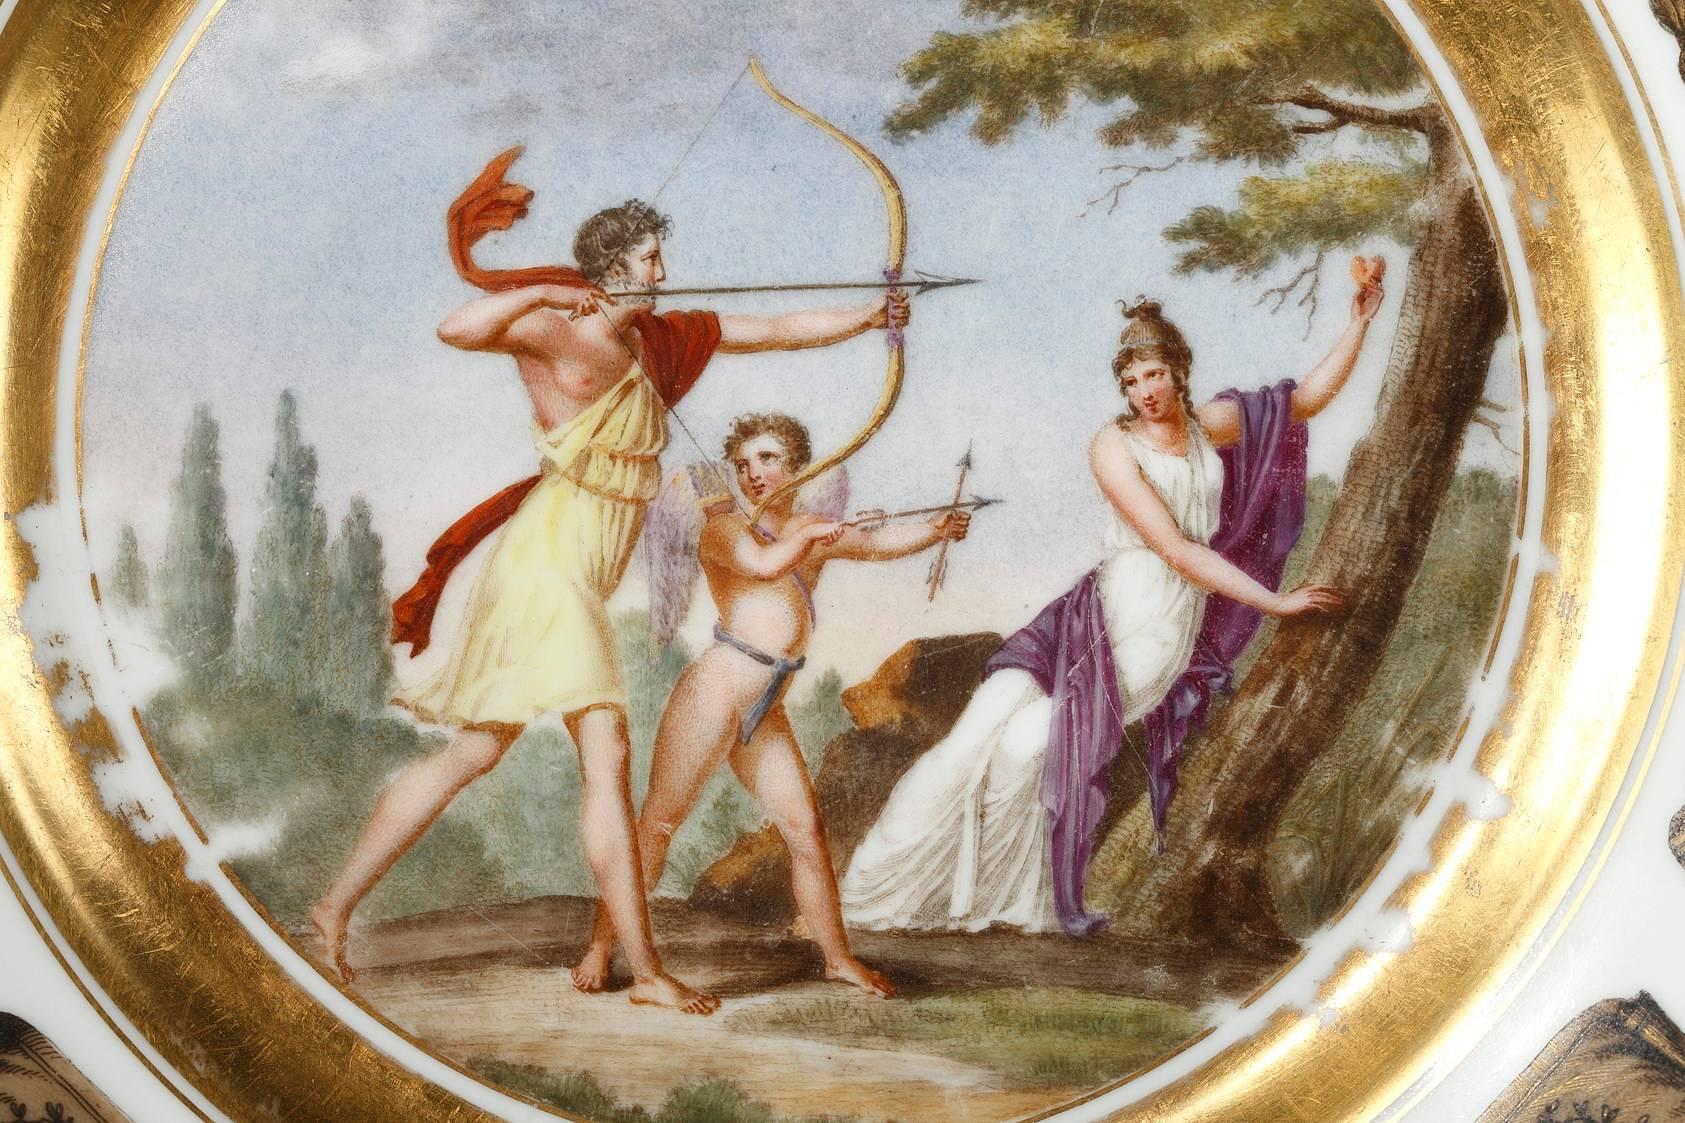 Earthenware plate from the Creil factory, decorated with a mythological scene in a landscape. In this scene, a young man and Cupid are hunting together, accompanied by a Nymph who is holding up a heart in her hand. The young man is wearing a short